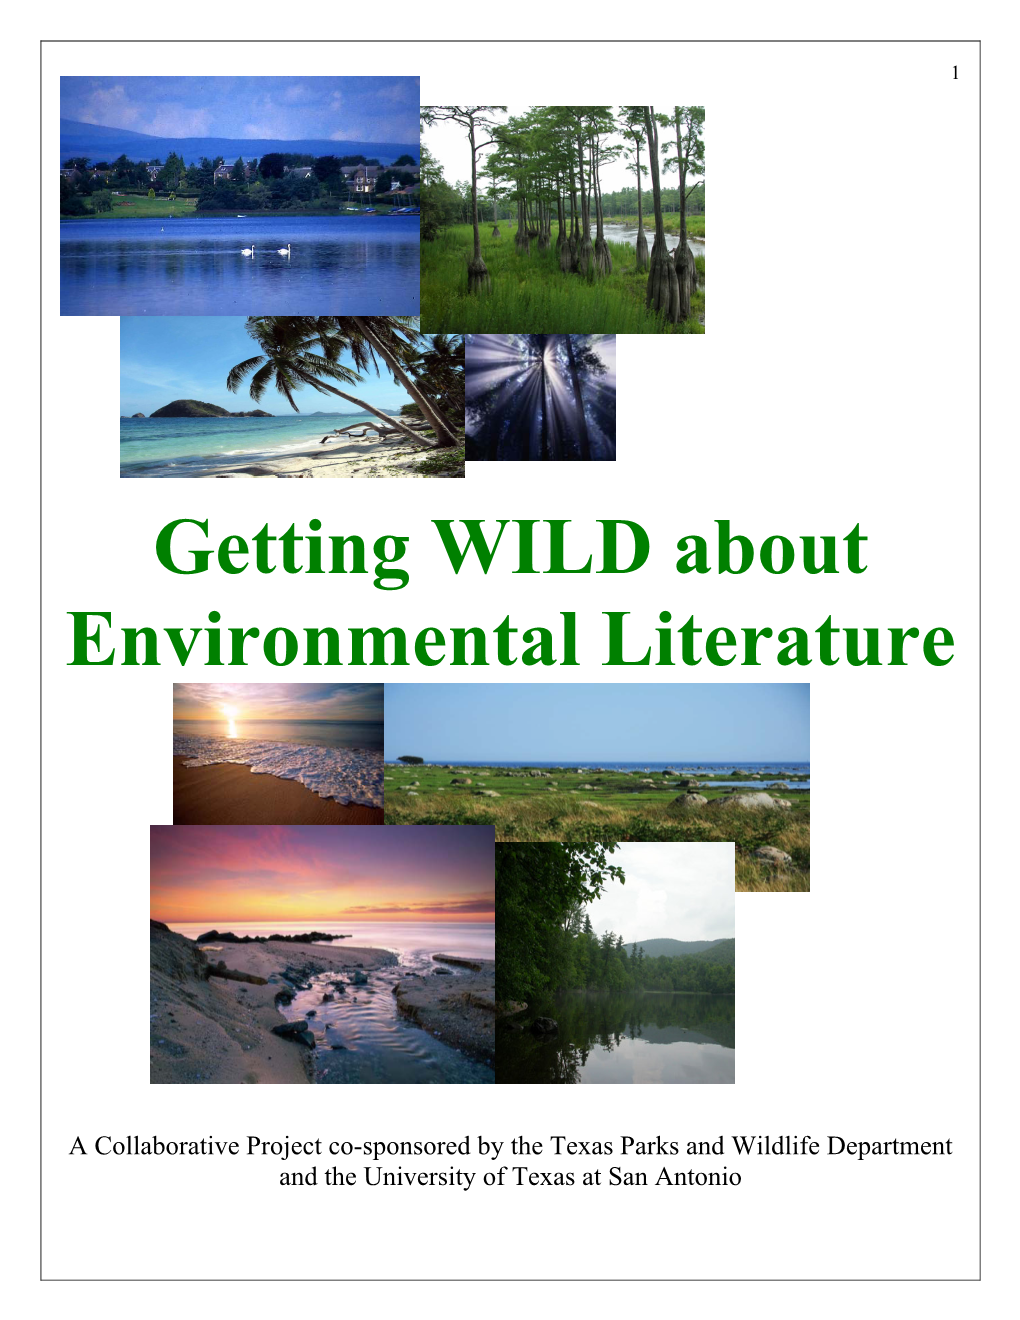 Getting WILD About Environmental Literature